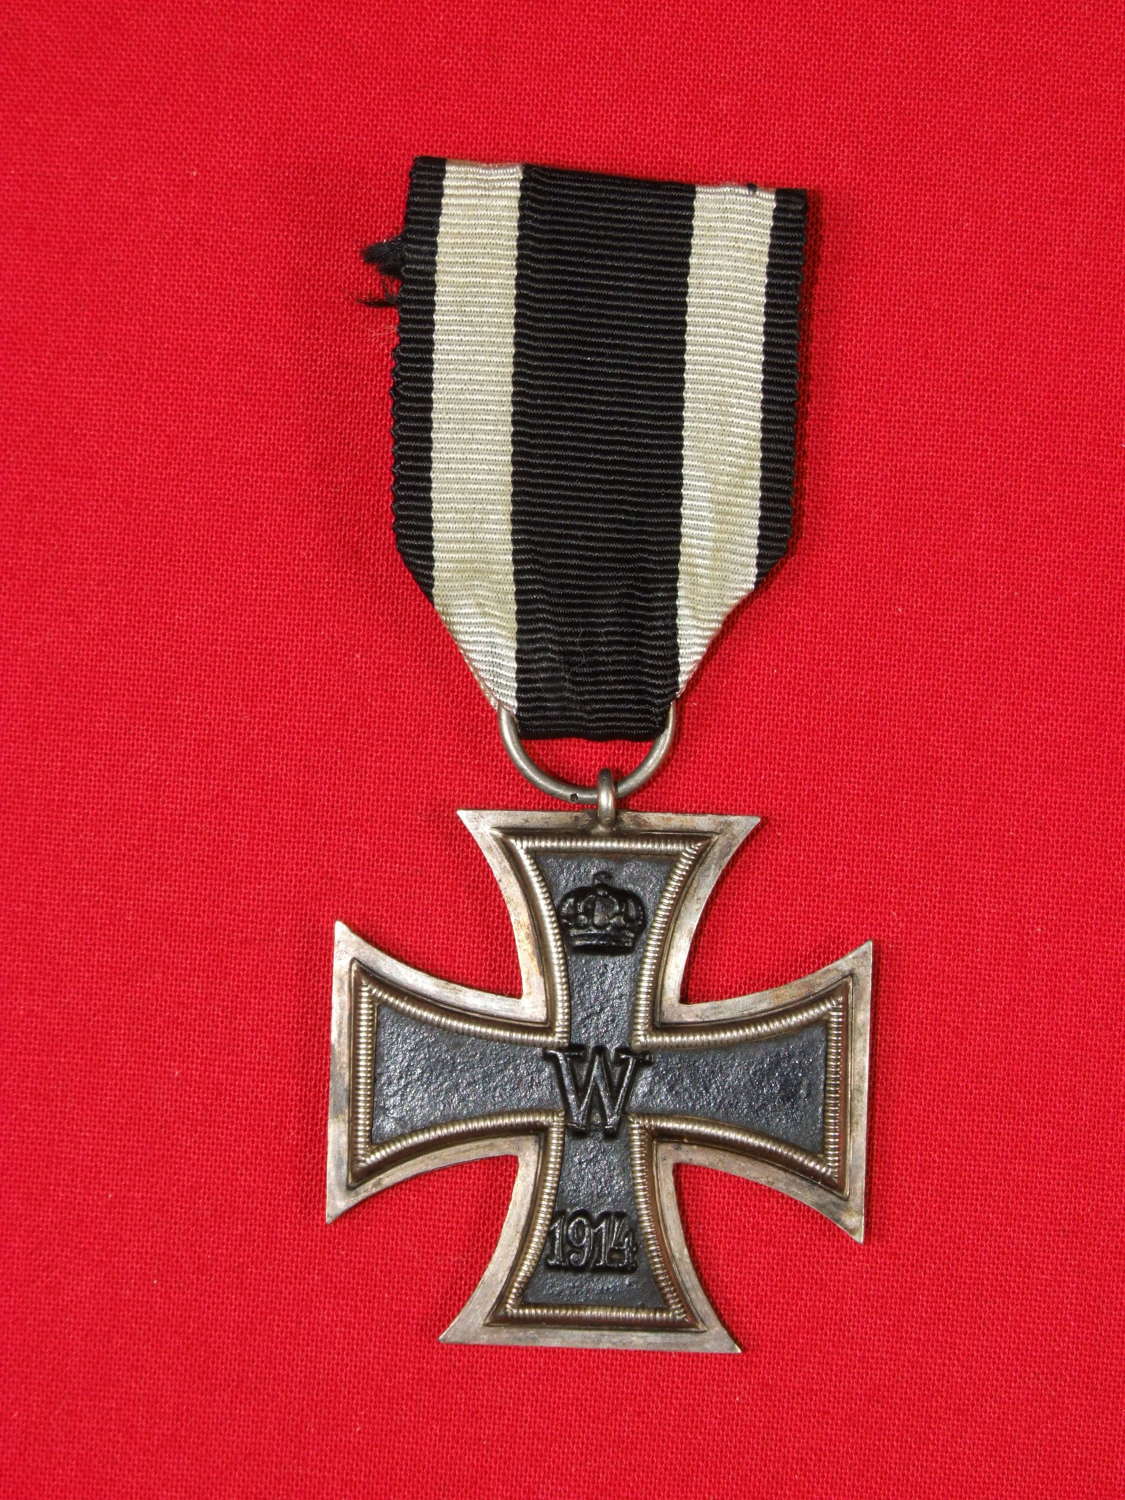 Imperial Iron Cross 2nd Class by Carl Dillenius